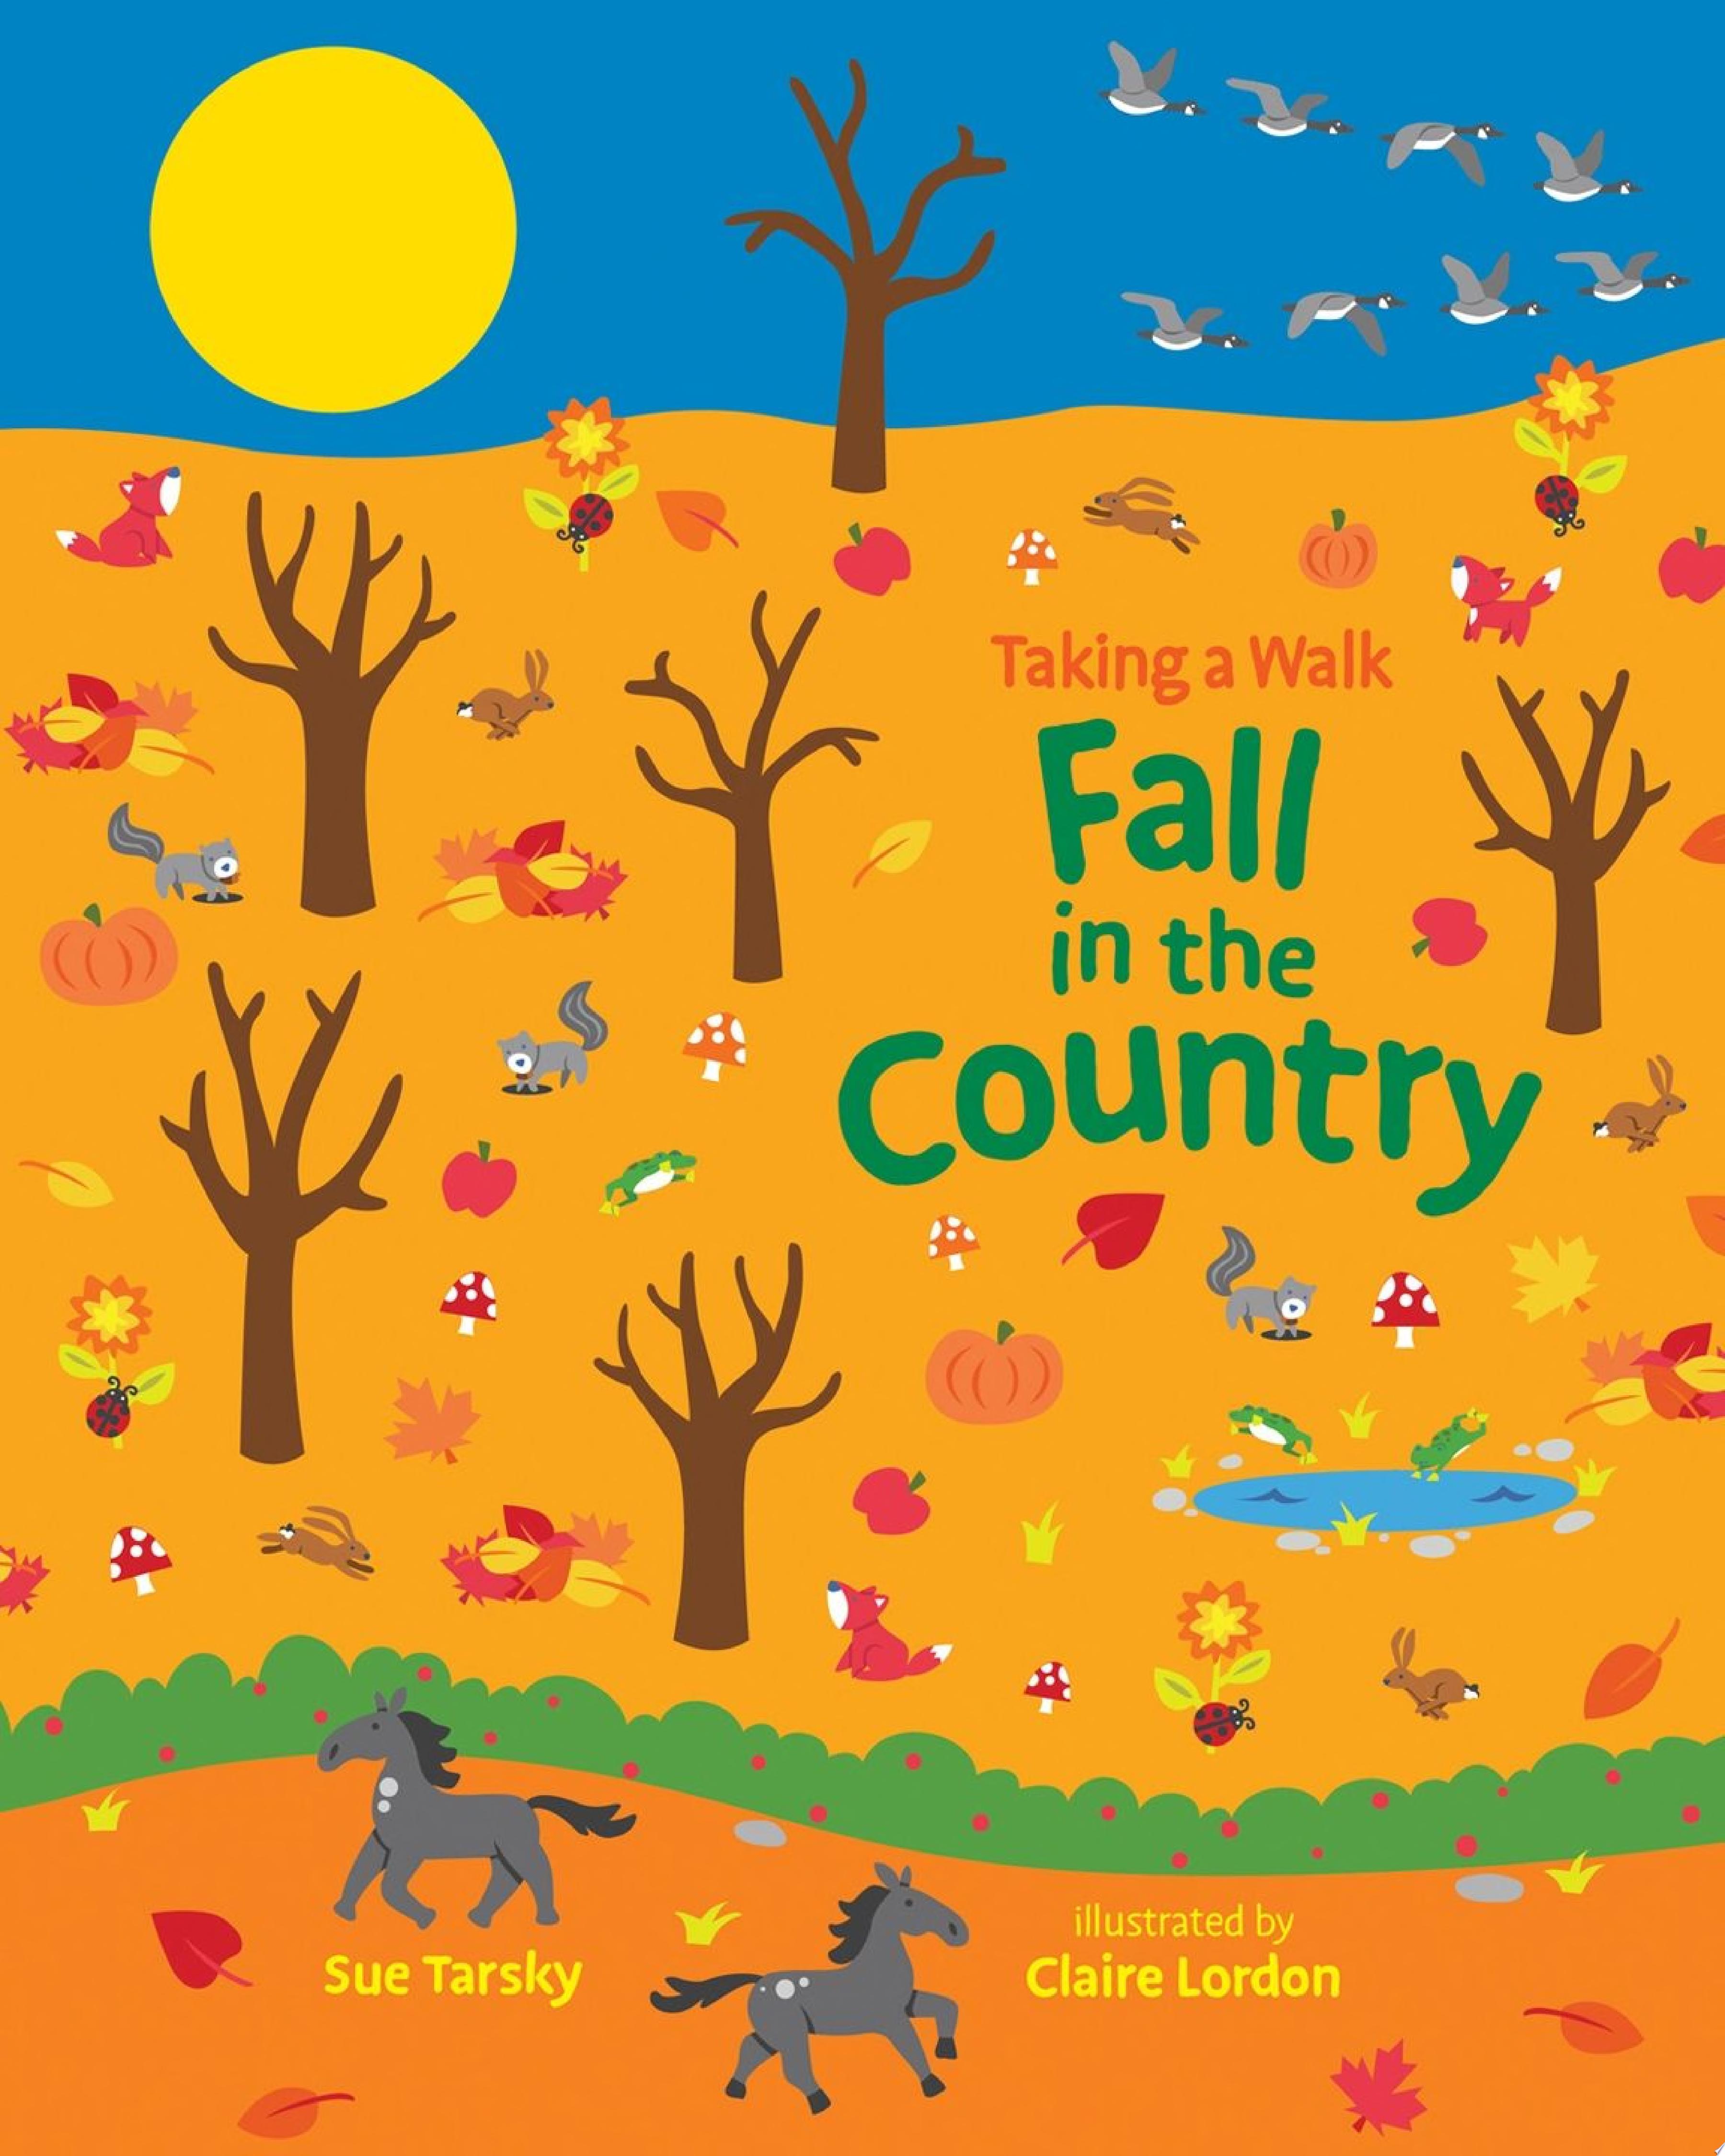 Image for "Fall in the Country"